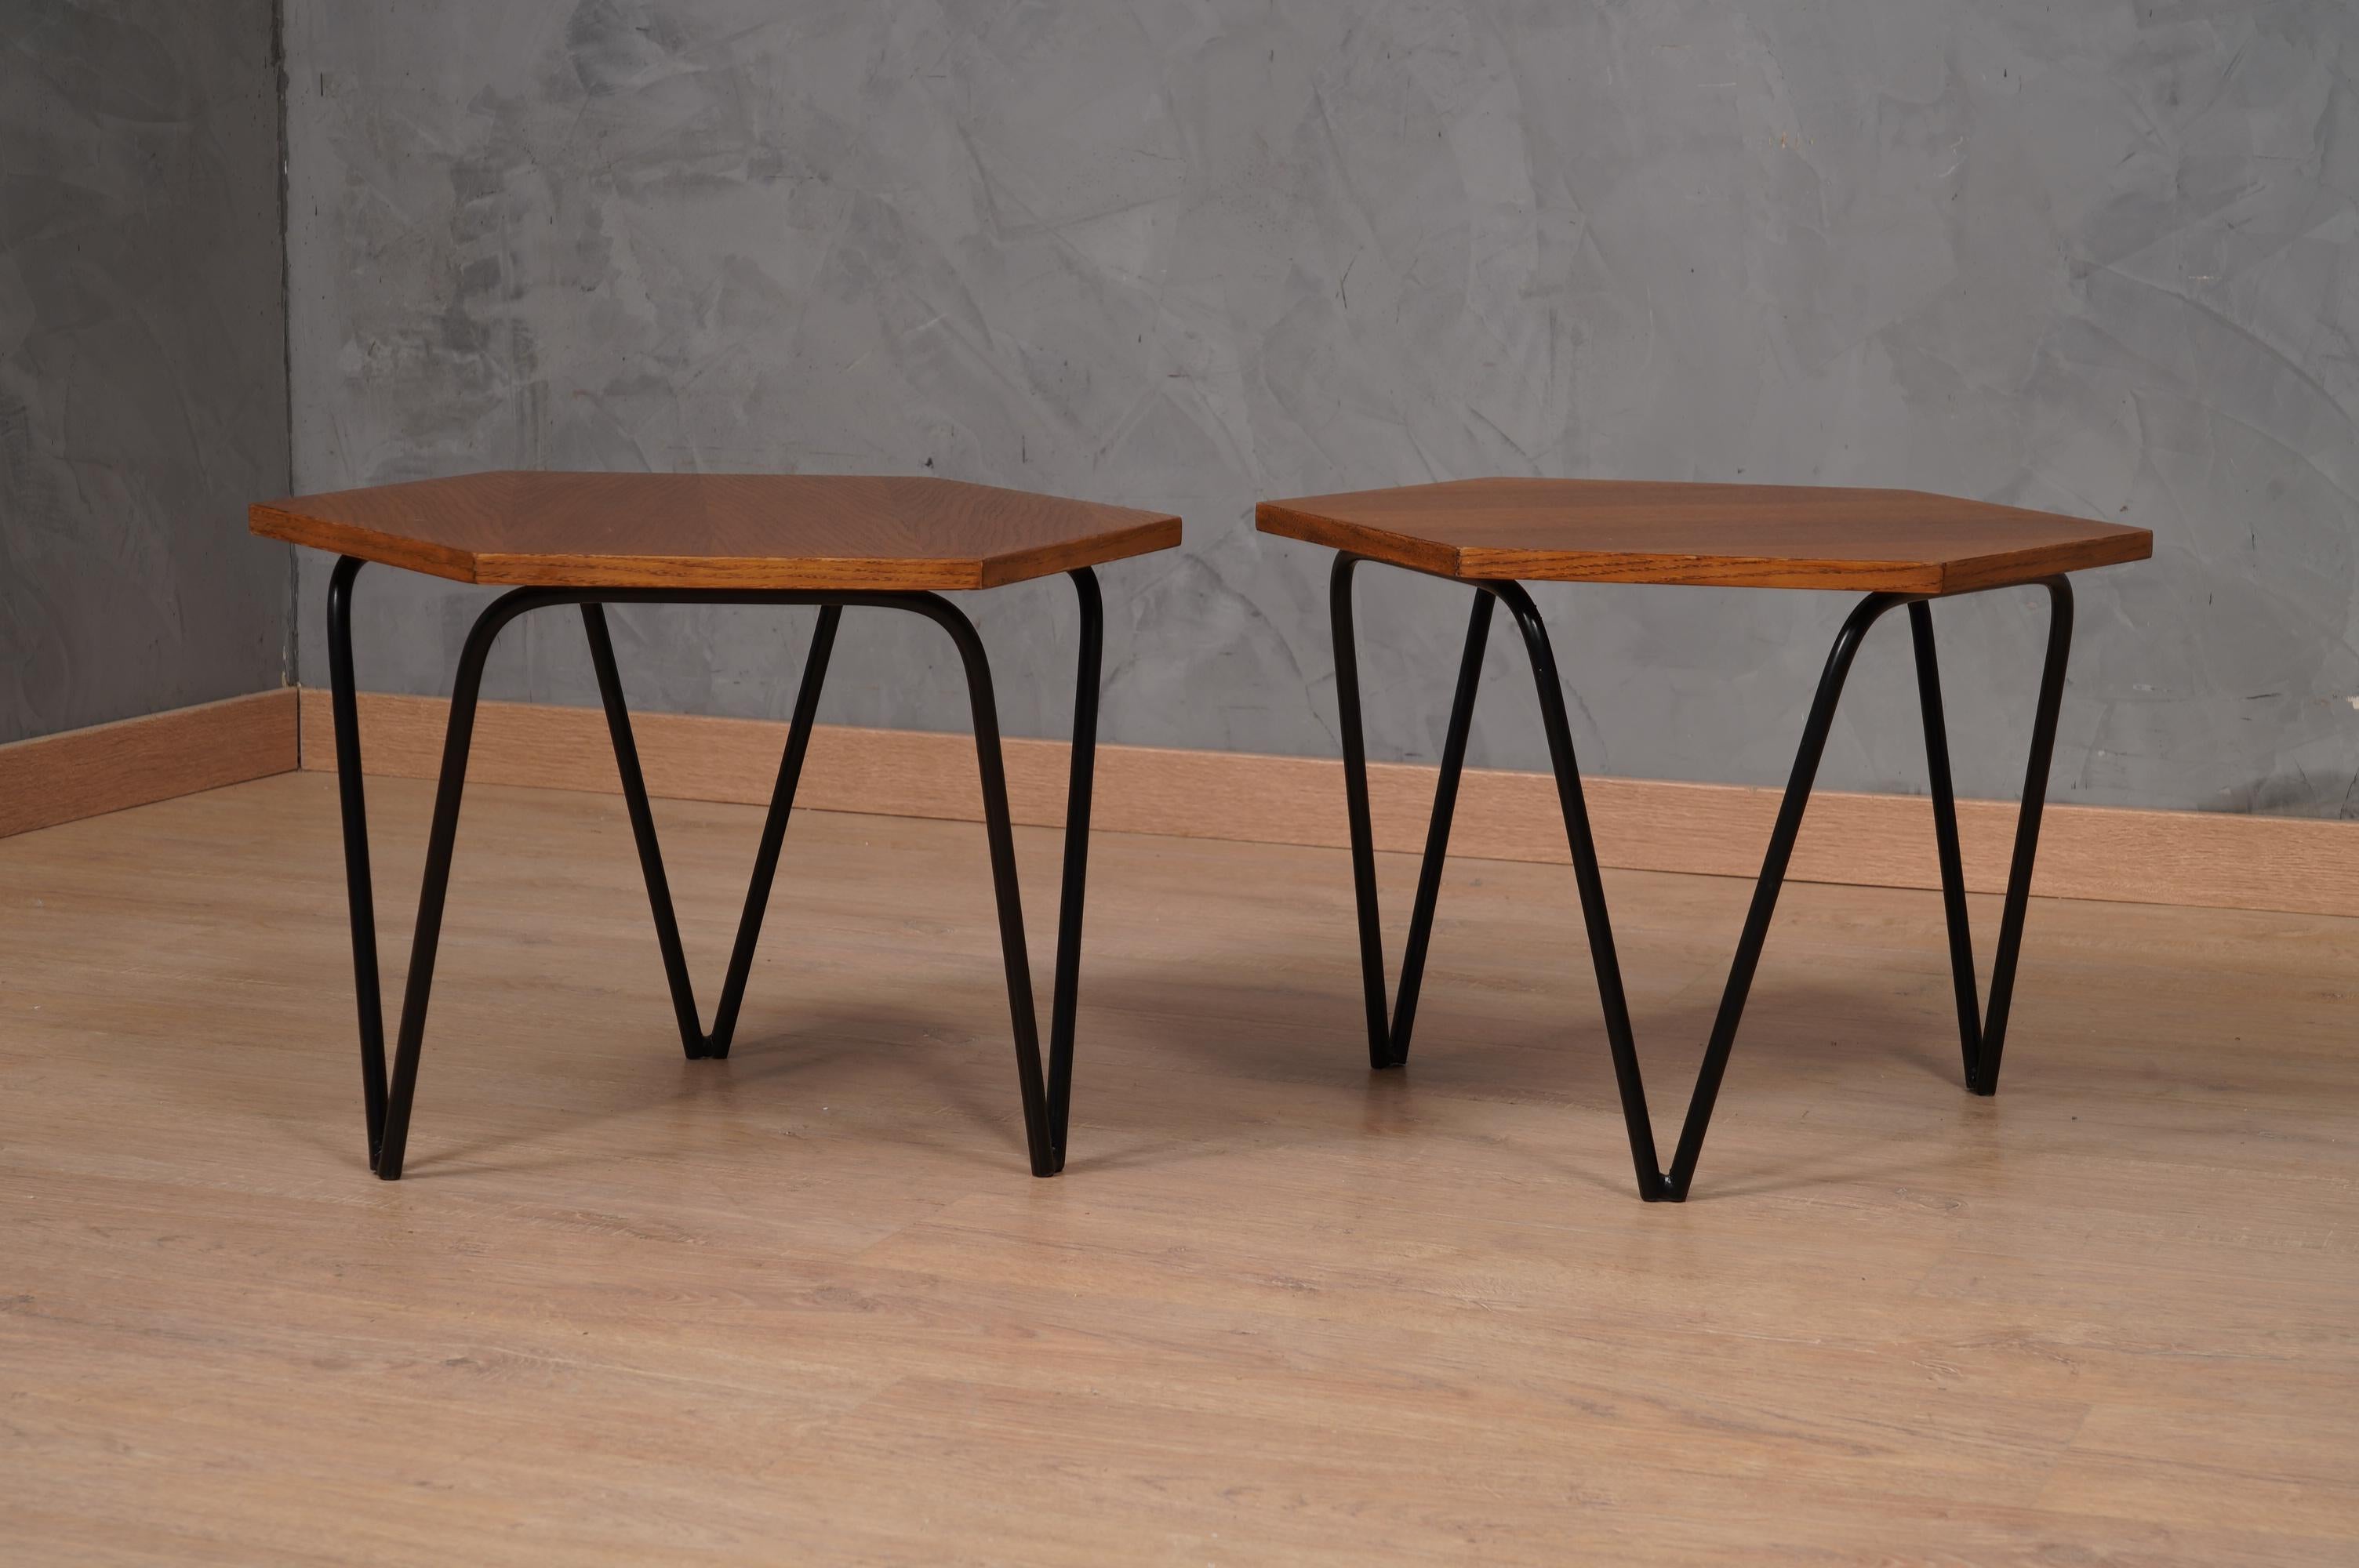 Gio Ponti splendid pair of hexagonal side tables manufactured by ISA. Elegant linear classics, and so on and so forth, one-of-a-kind furniture pieces. Icons of Italian design, the distinctive feature is the sense of lightness and grace.

This pair